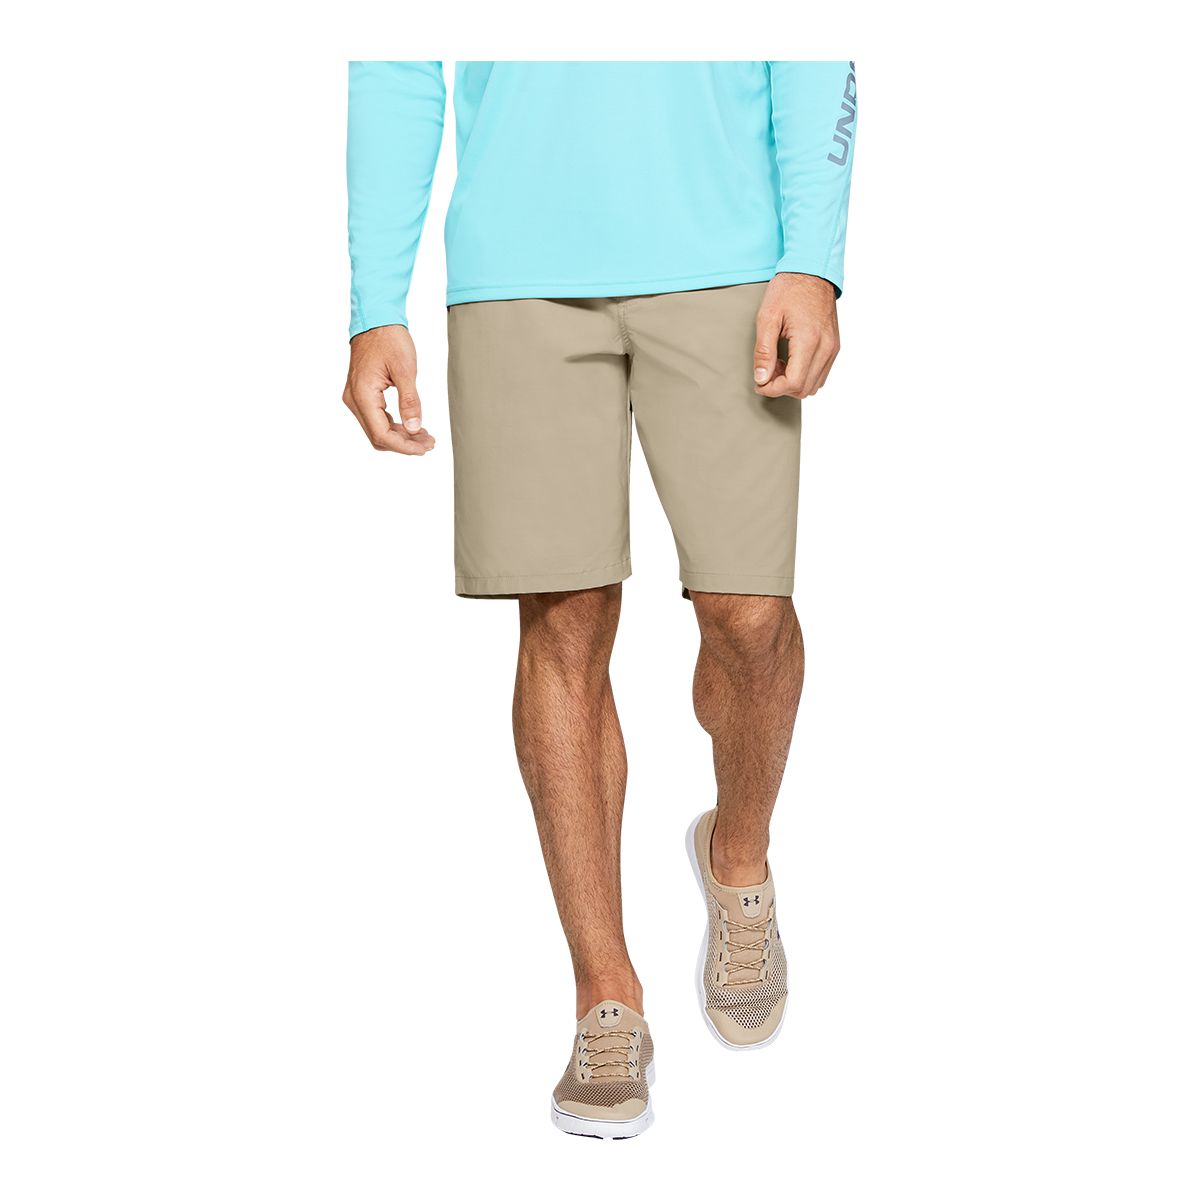 Under Armour Men's Fish Hunter 10-in Shorts